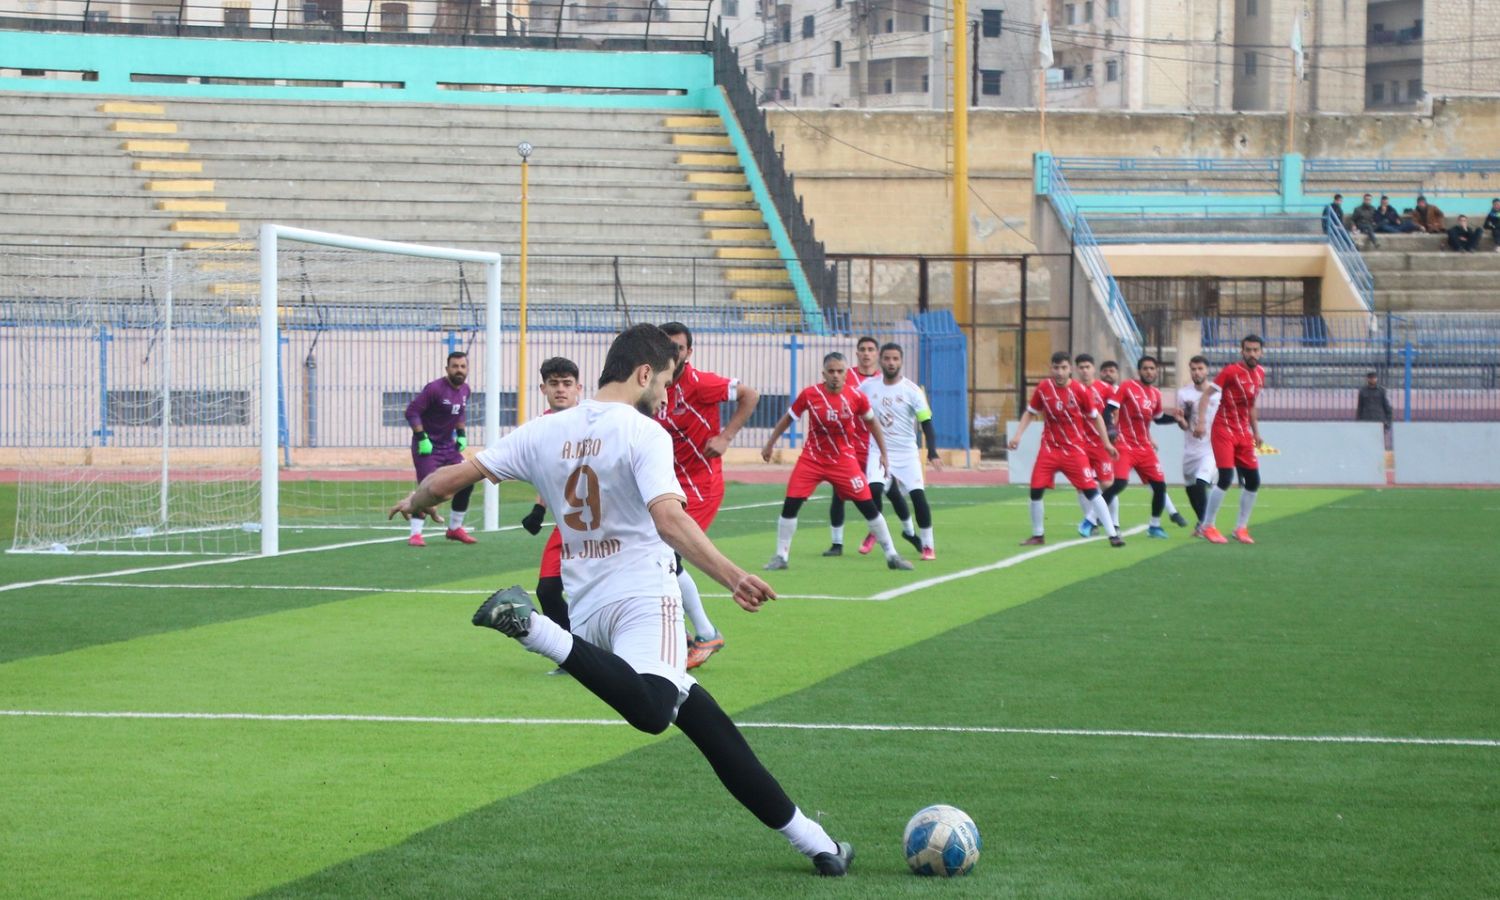 Players of al-Jihad Club and Taftanaz Club during a match in the sixth week of the Football League First Division in Idlib - February 4, 2023 (Free Syrian Football Federation)